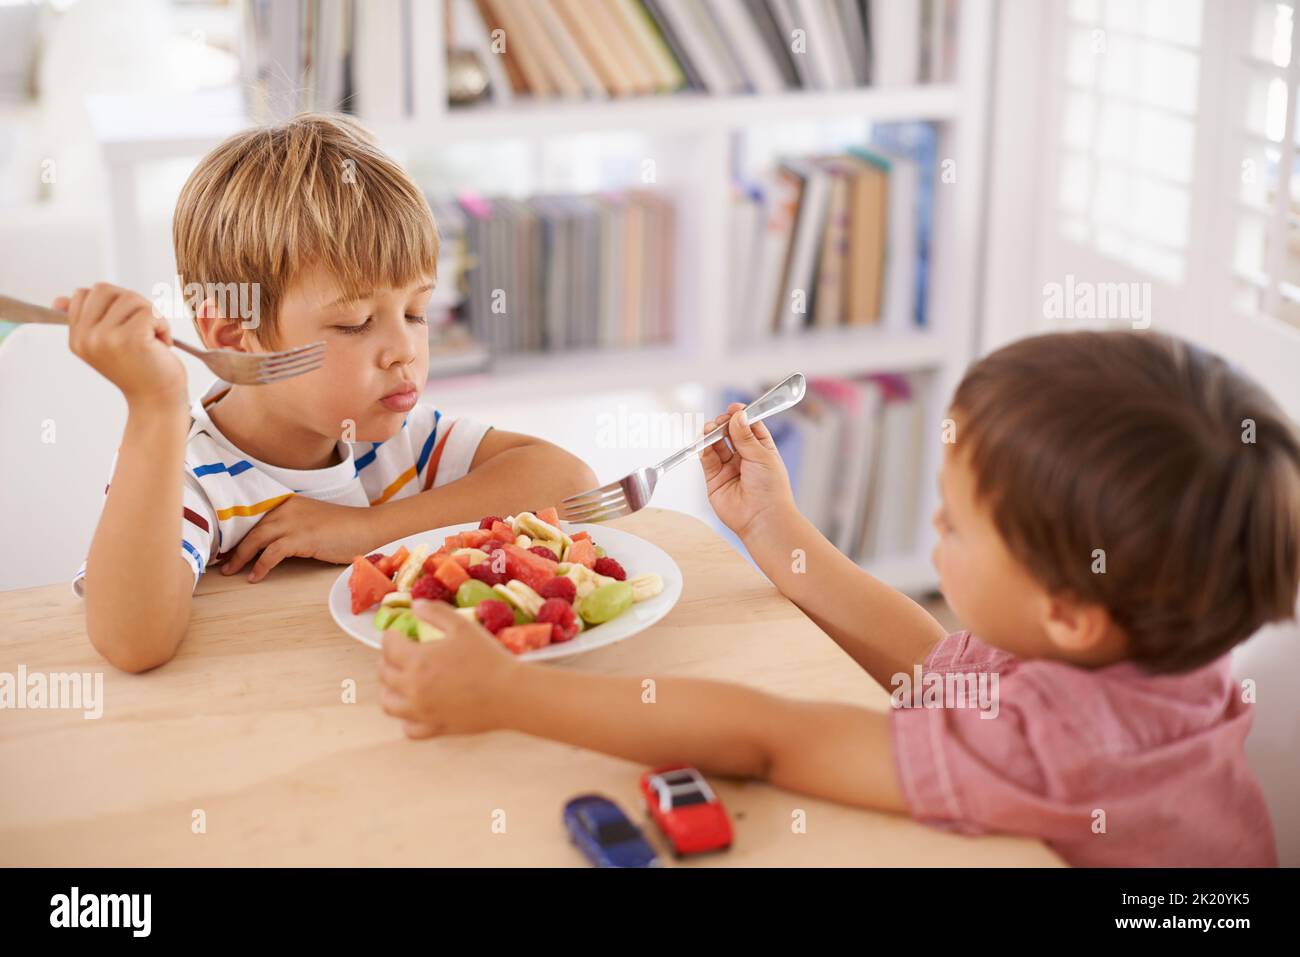 Eating healthy so that we can grow strong. Two adorable little brothers share a bowl of fruit salad at home. Stock Photo